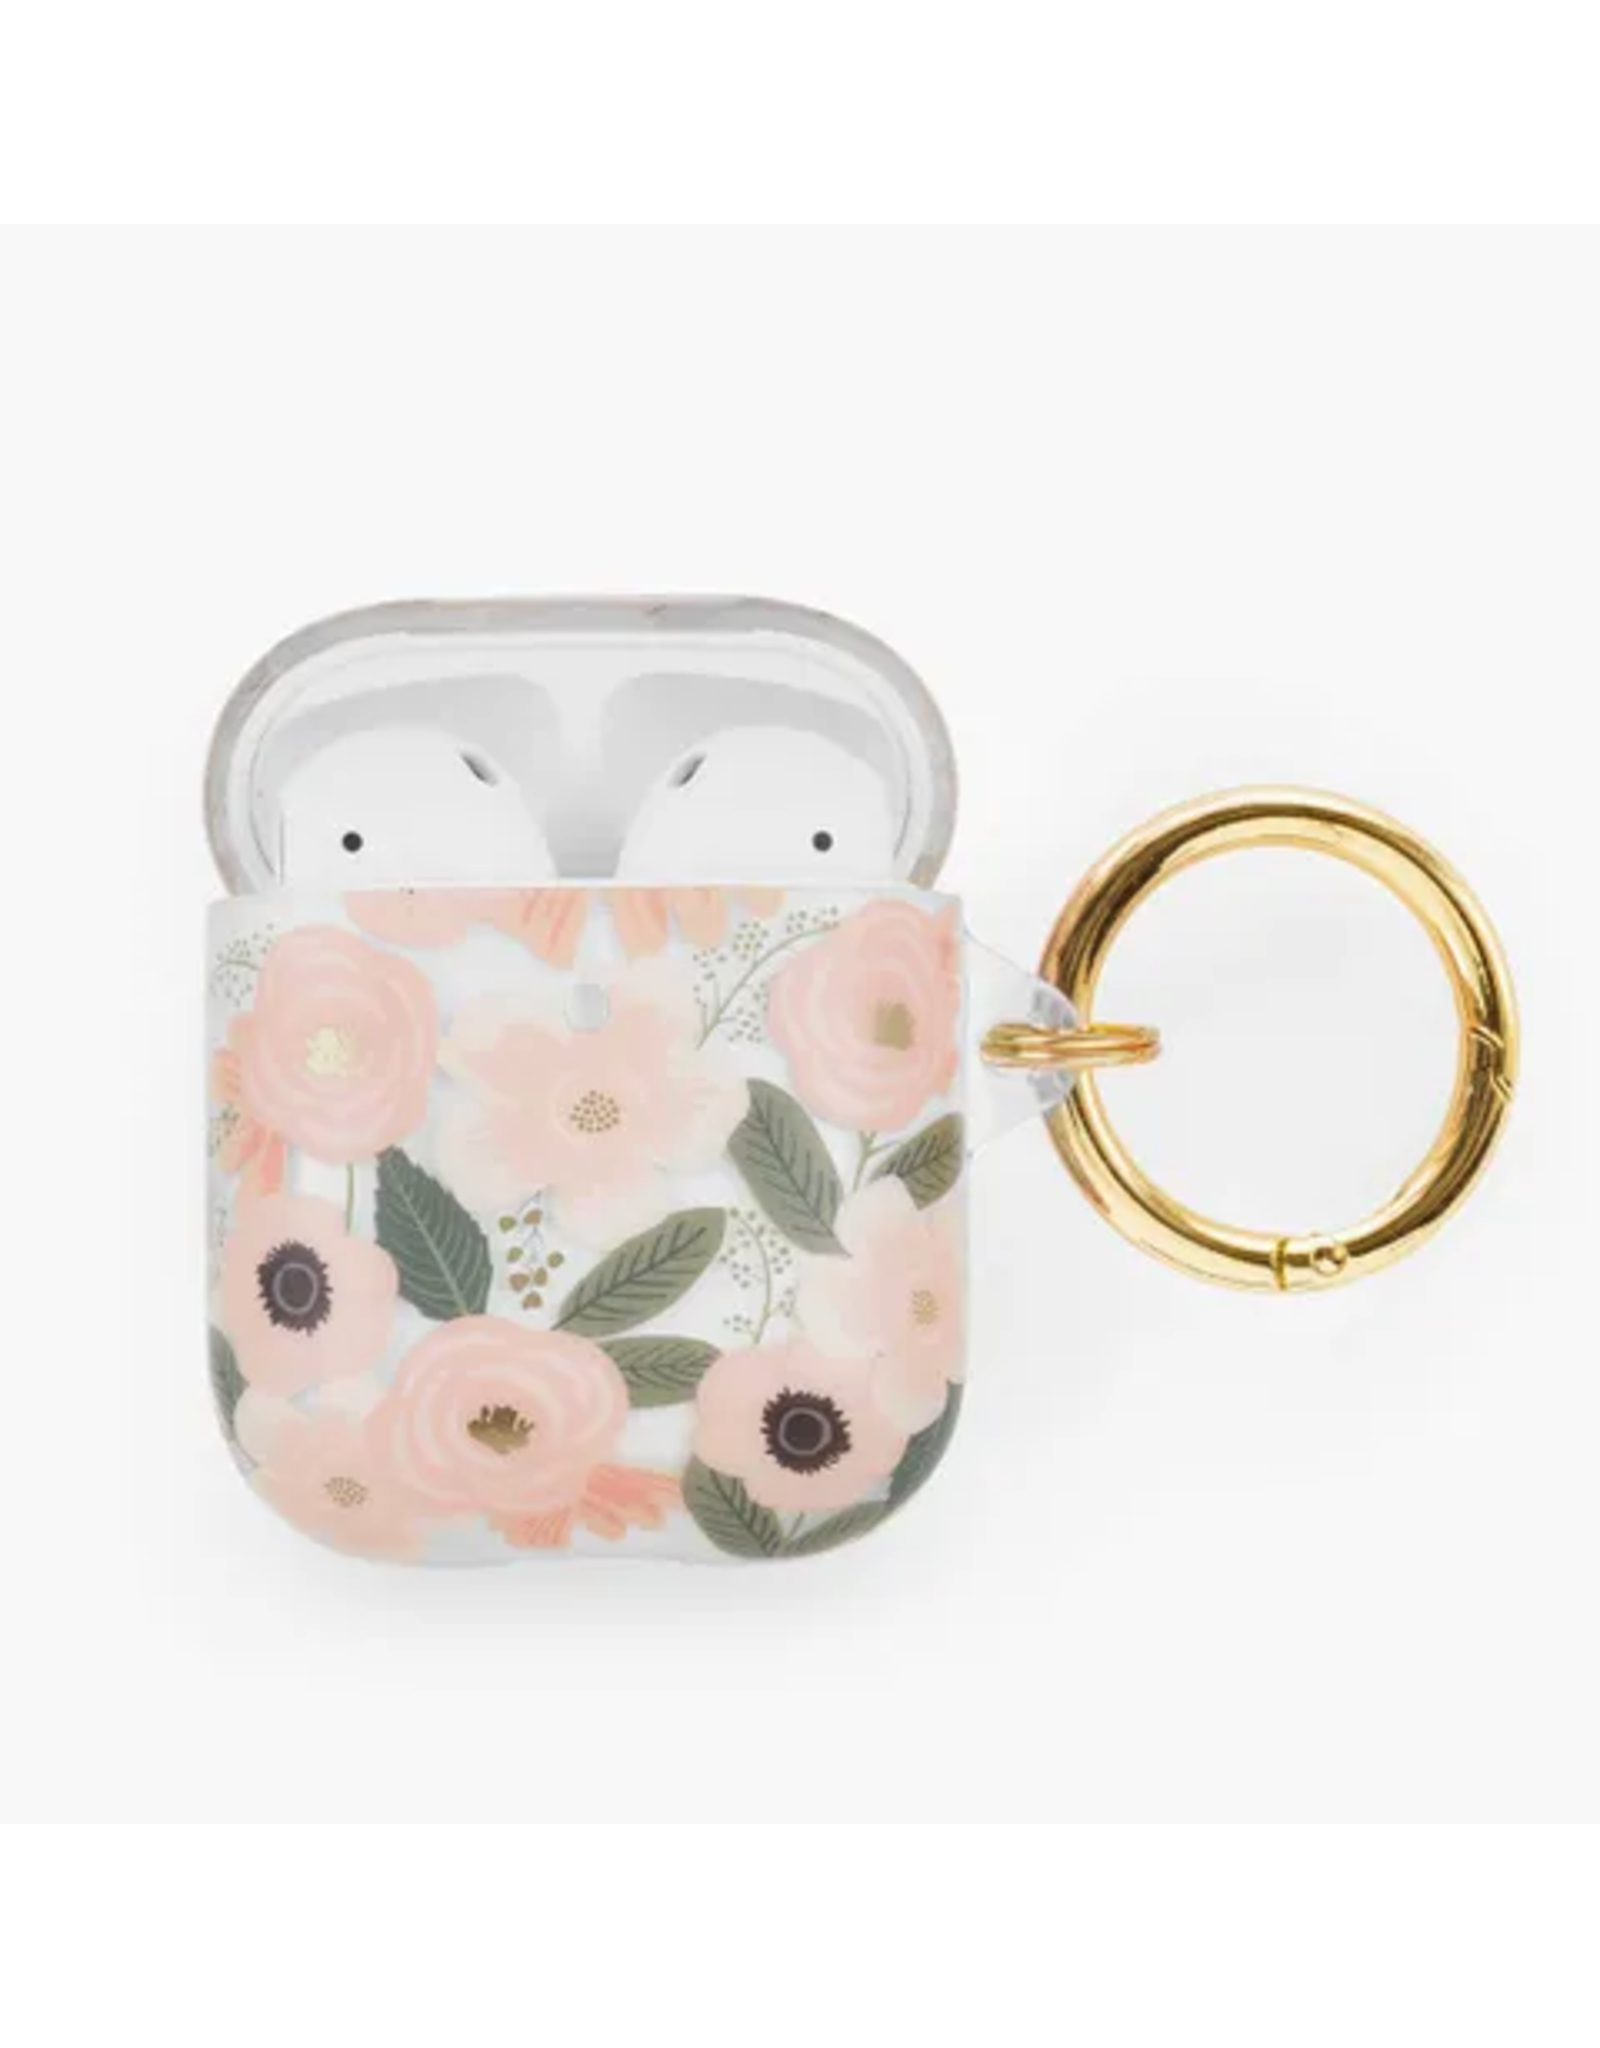 Rifle Paper Clear AirPod Pro Case